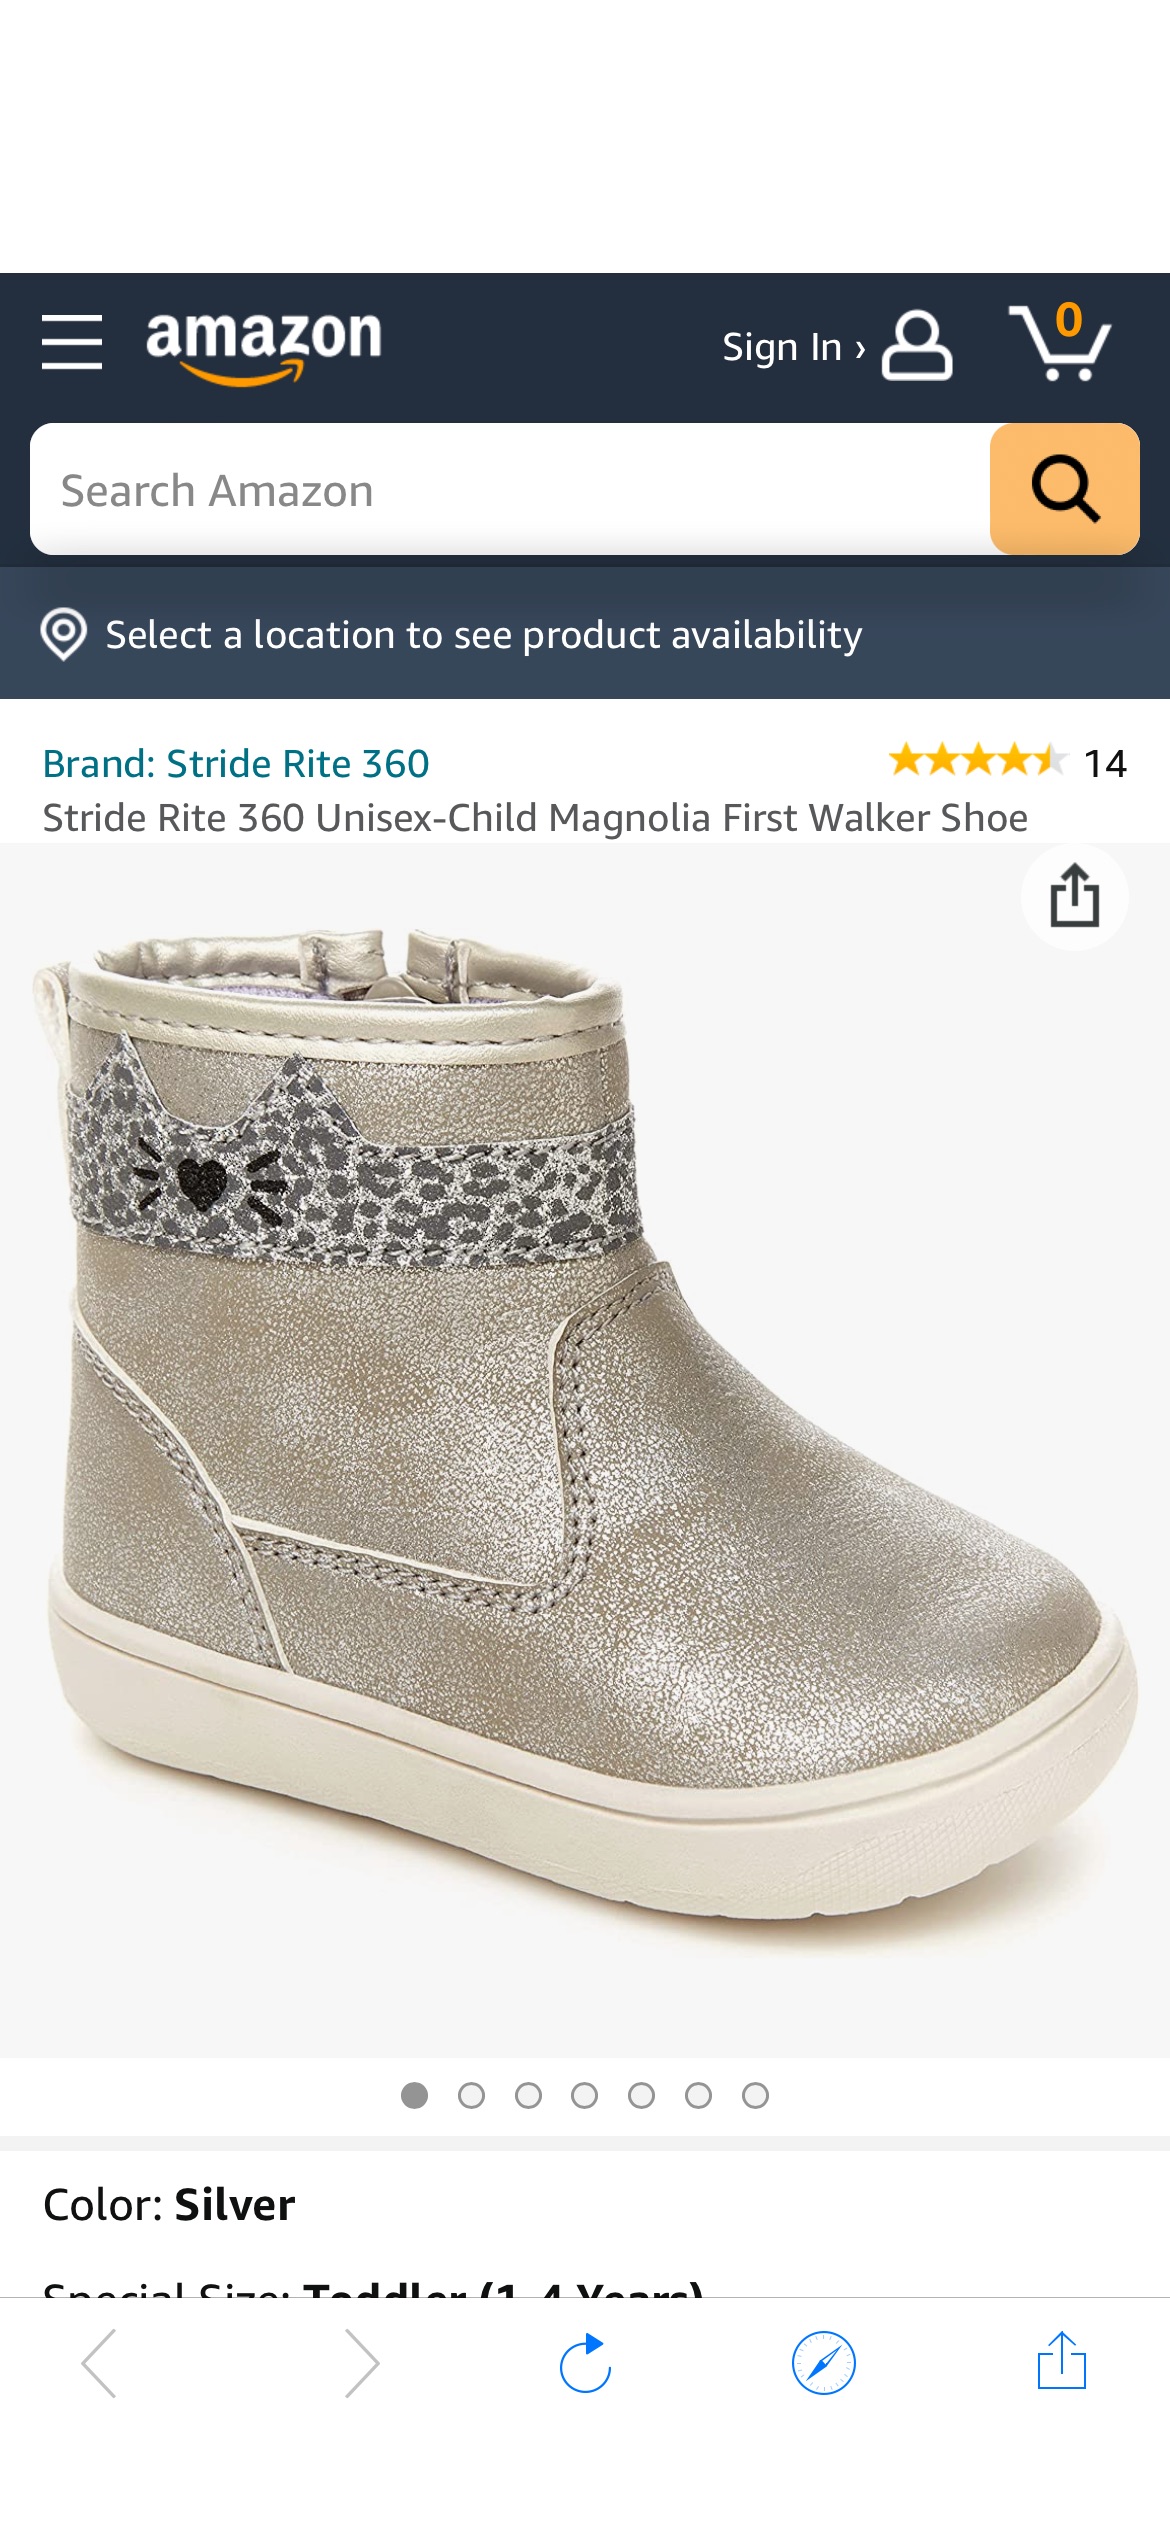 Amazon.com | Stride Rite 360 Infant and Toddler Girls Magnolia First Walker Shoe, Silver | Boots 6码白菜价